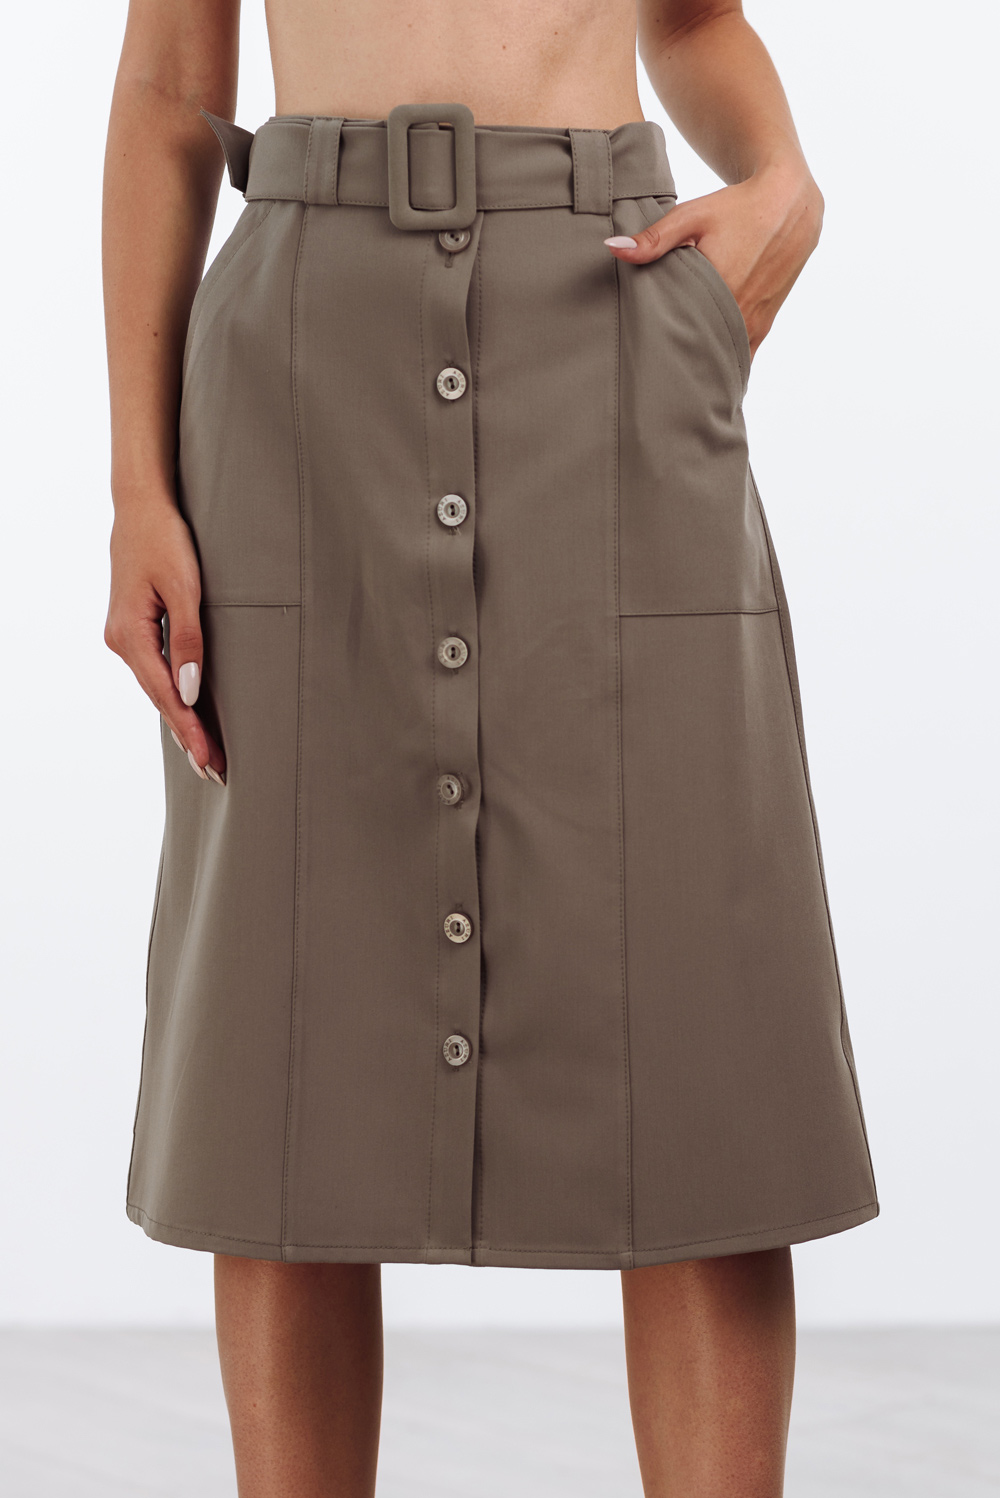 Beige skirt with buttons